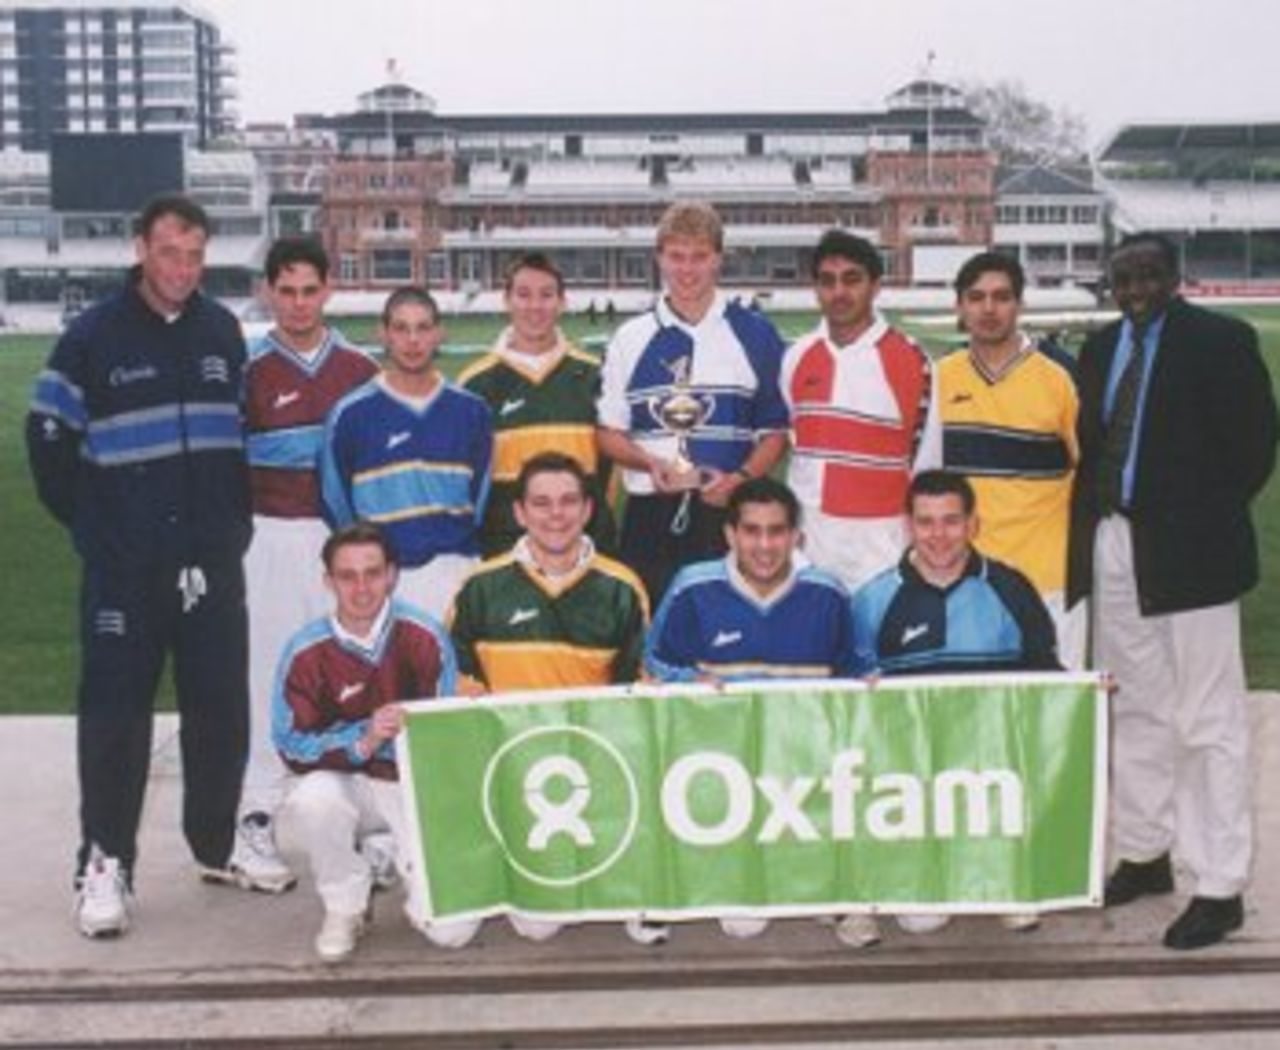 The PCA lend their support to the Oxfam Varsity Cricket matches, six of which will take place during 2000.  Photo: Lord's, 3 May 2000